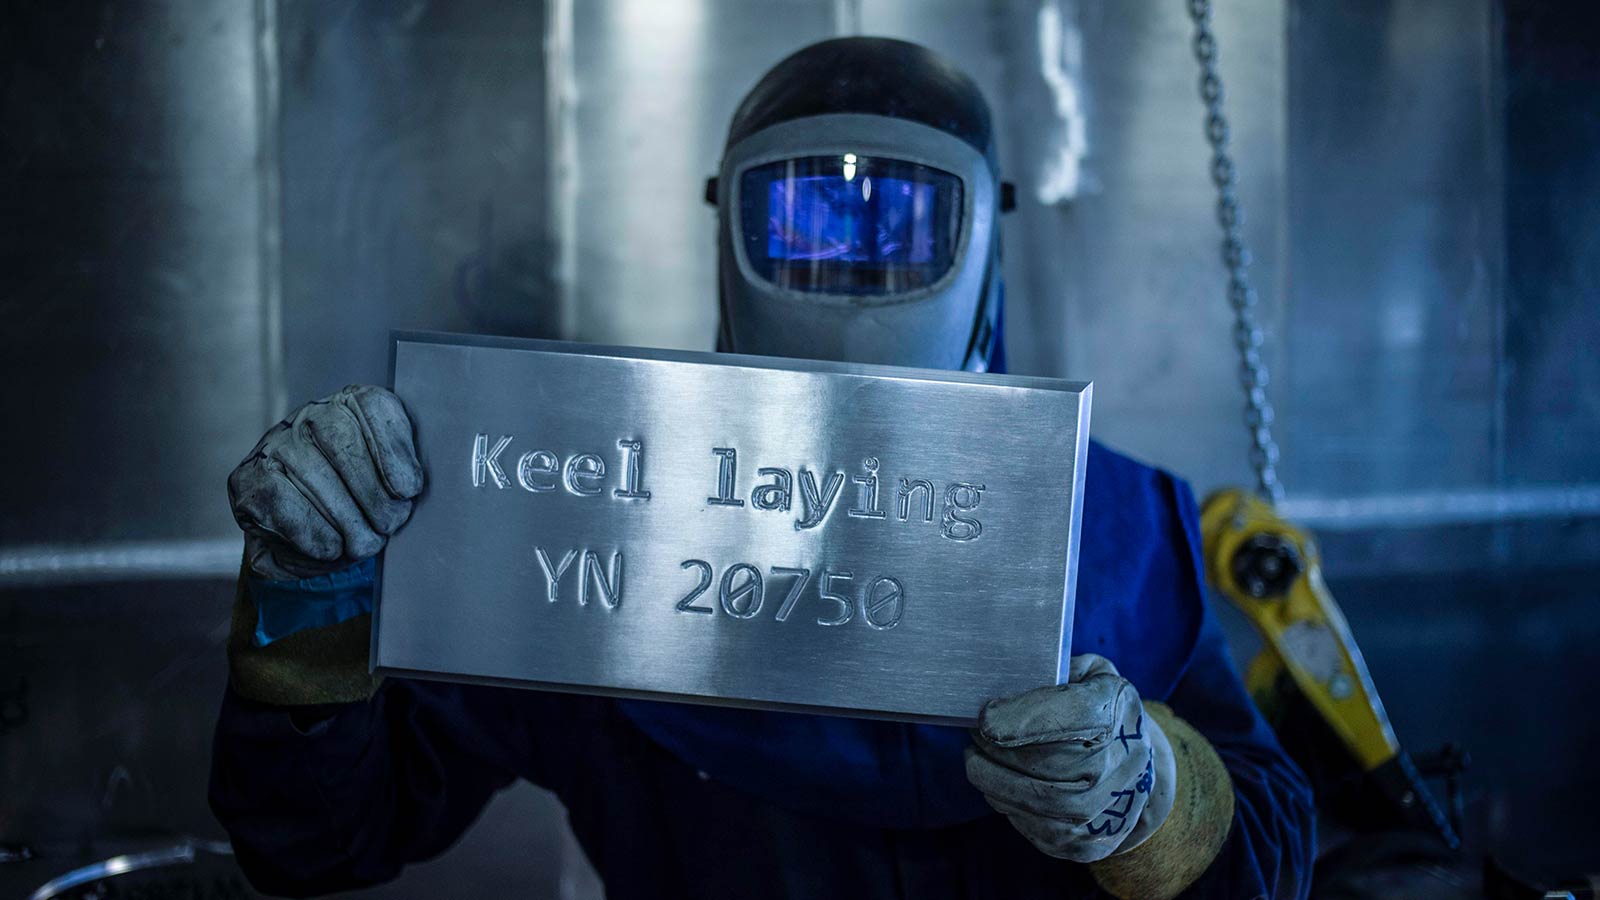 A new star is born: YN 20750 Project Orion keel laying announcement